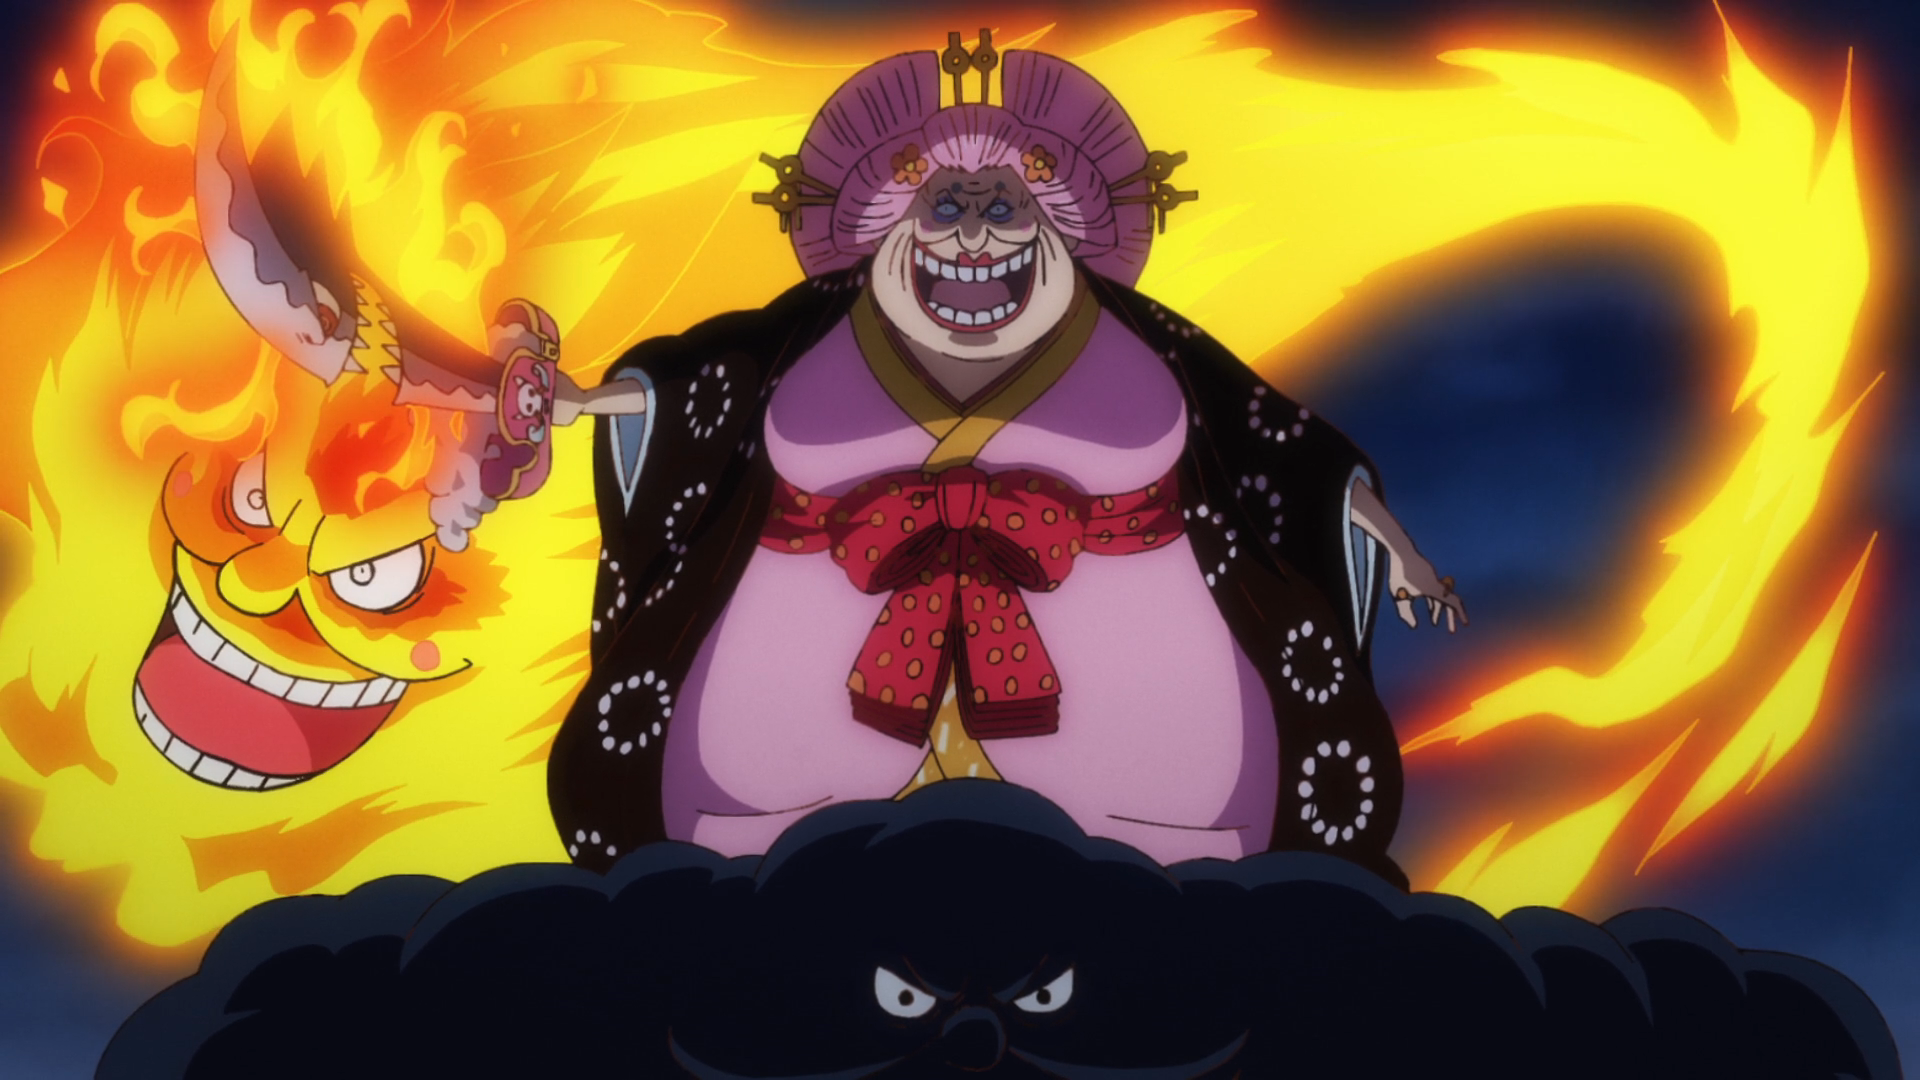 Bari Bari no Mi is way more powerful than we thought! - One Piece